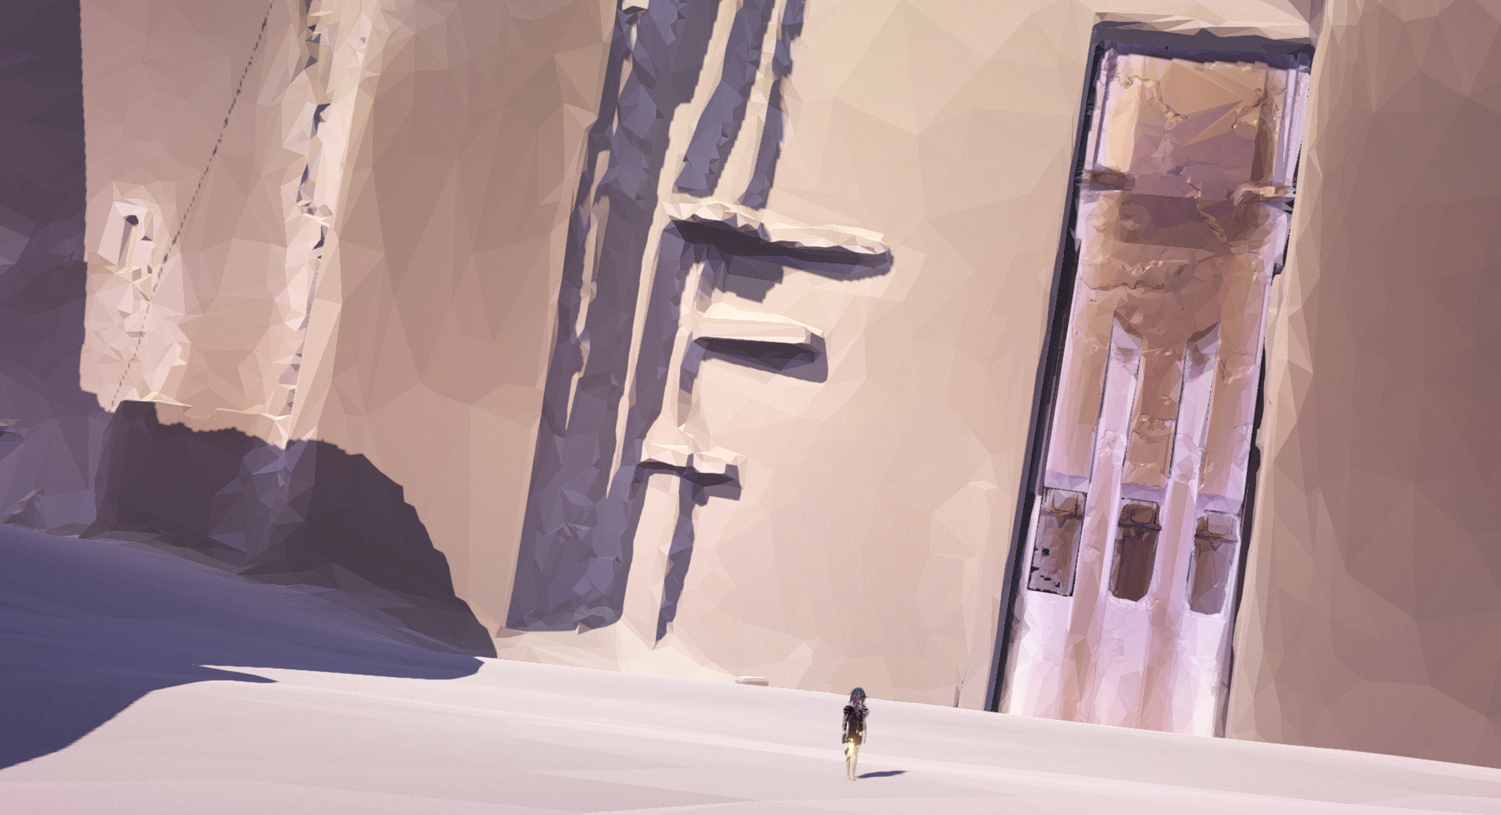 The Gorgeous Indie Game Vane Won’t Be Out For A Long While